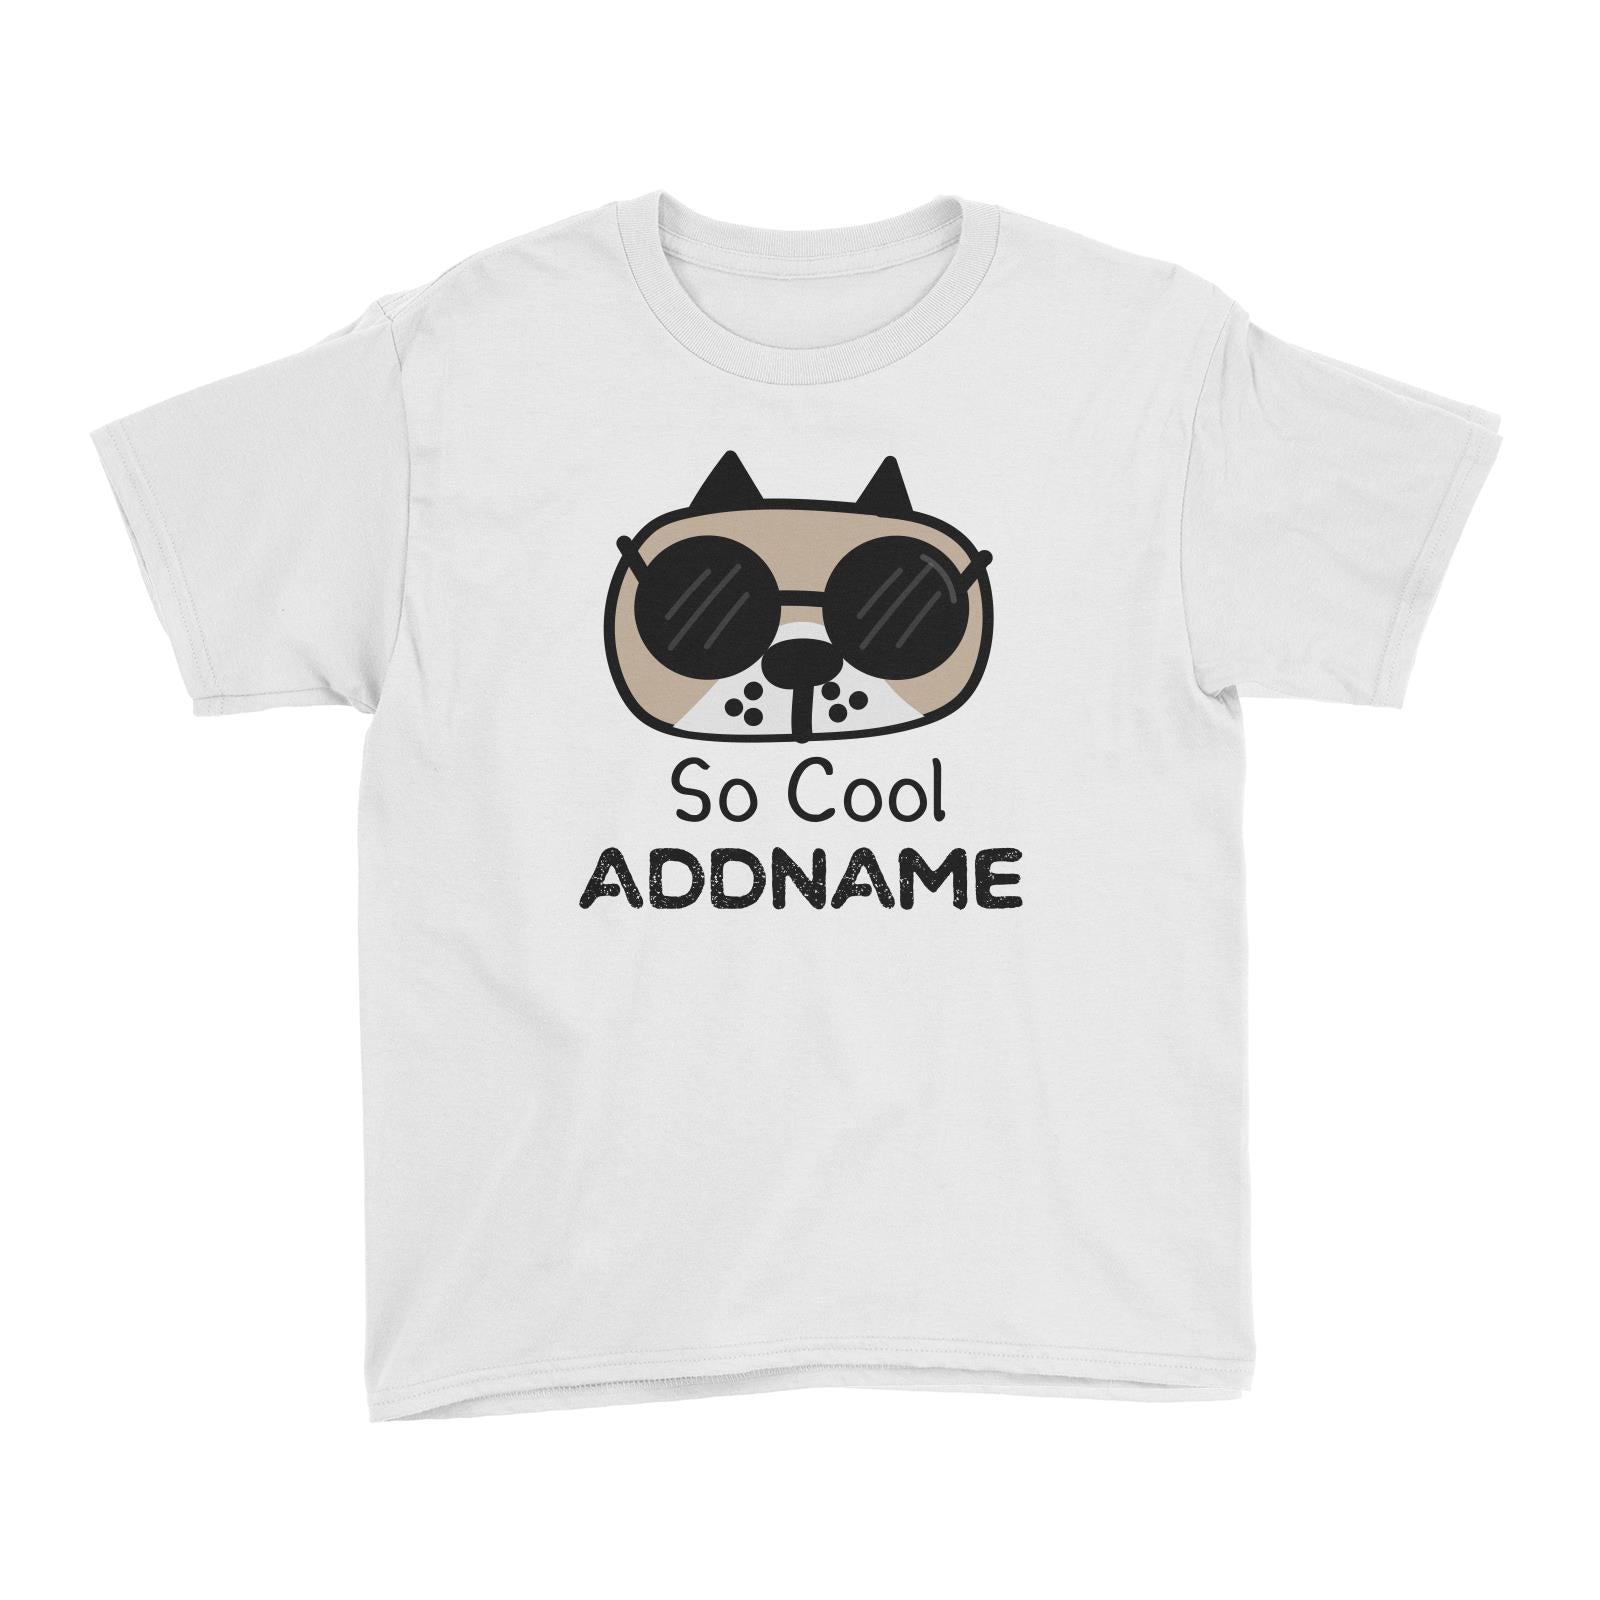 Cute Animals And Friends Series Cool Dog With Sunglasses Addname Kid's T-Shirt